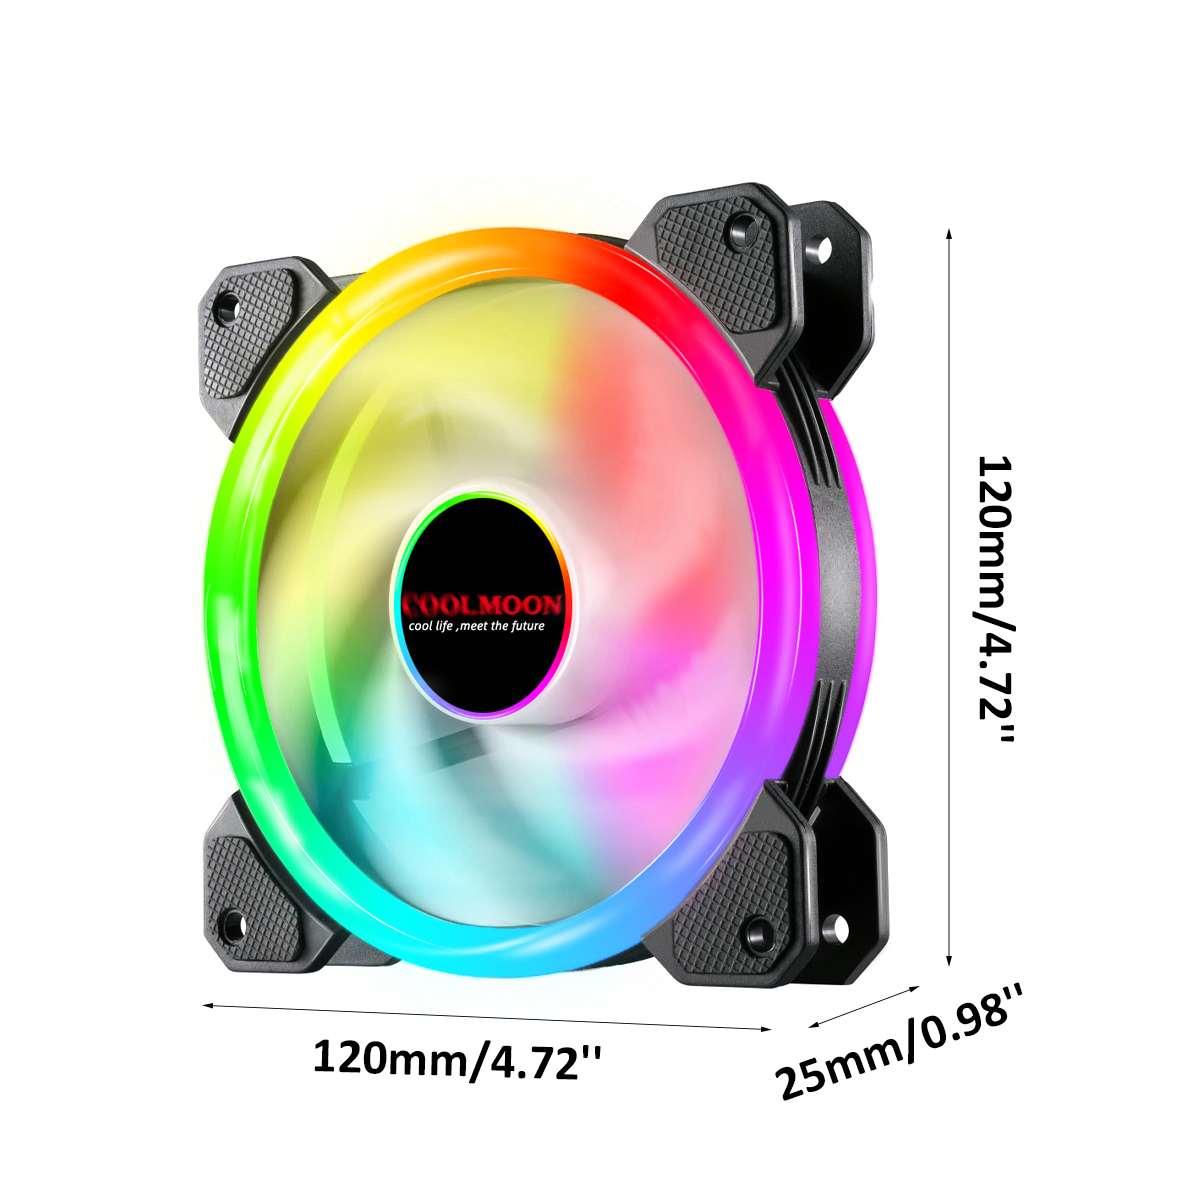 120mm-Computer-PC-Cooler-Cooling-Fan-RGB-LED-Multicolor-mode-Quiet-Chassis-Fan-With-Controller-1940489-12